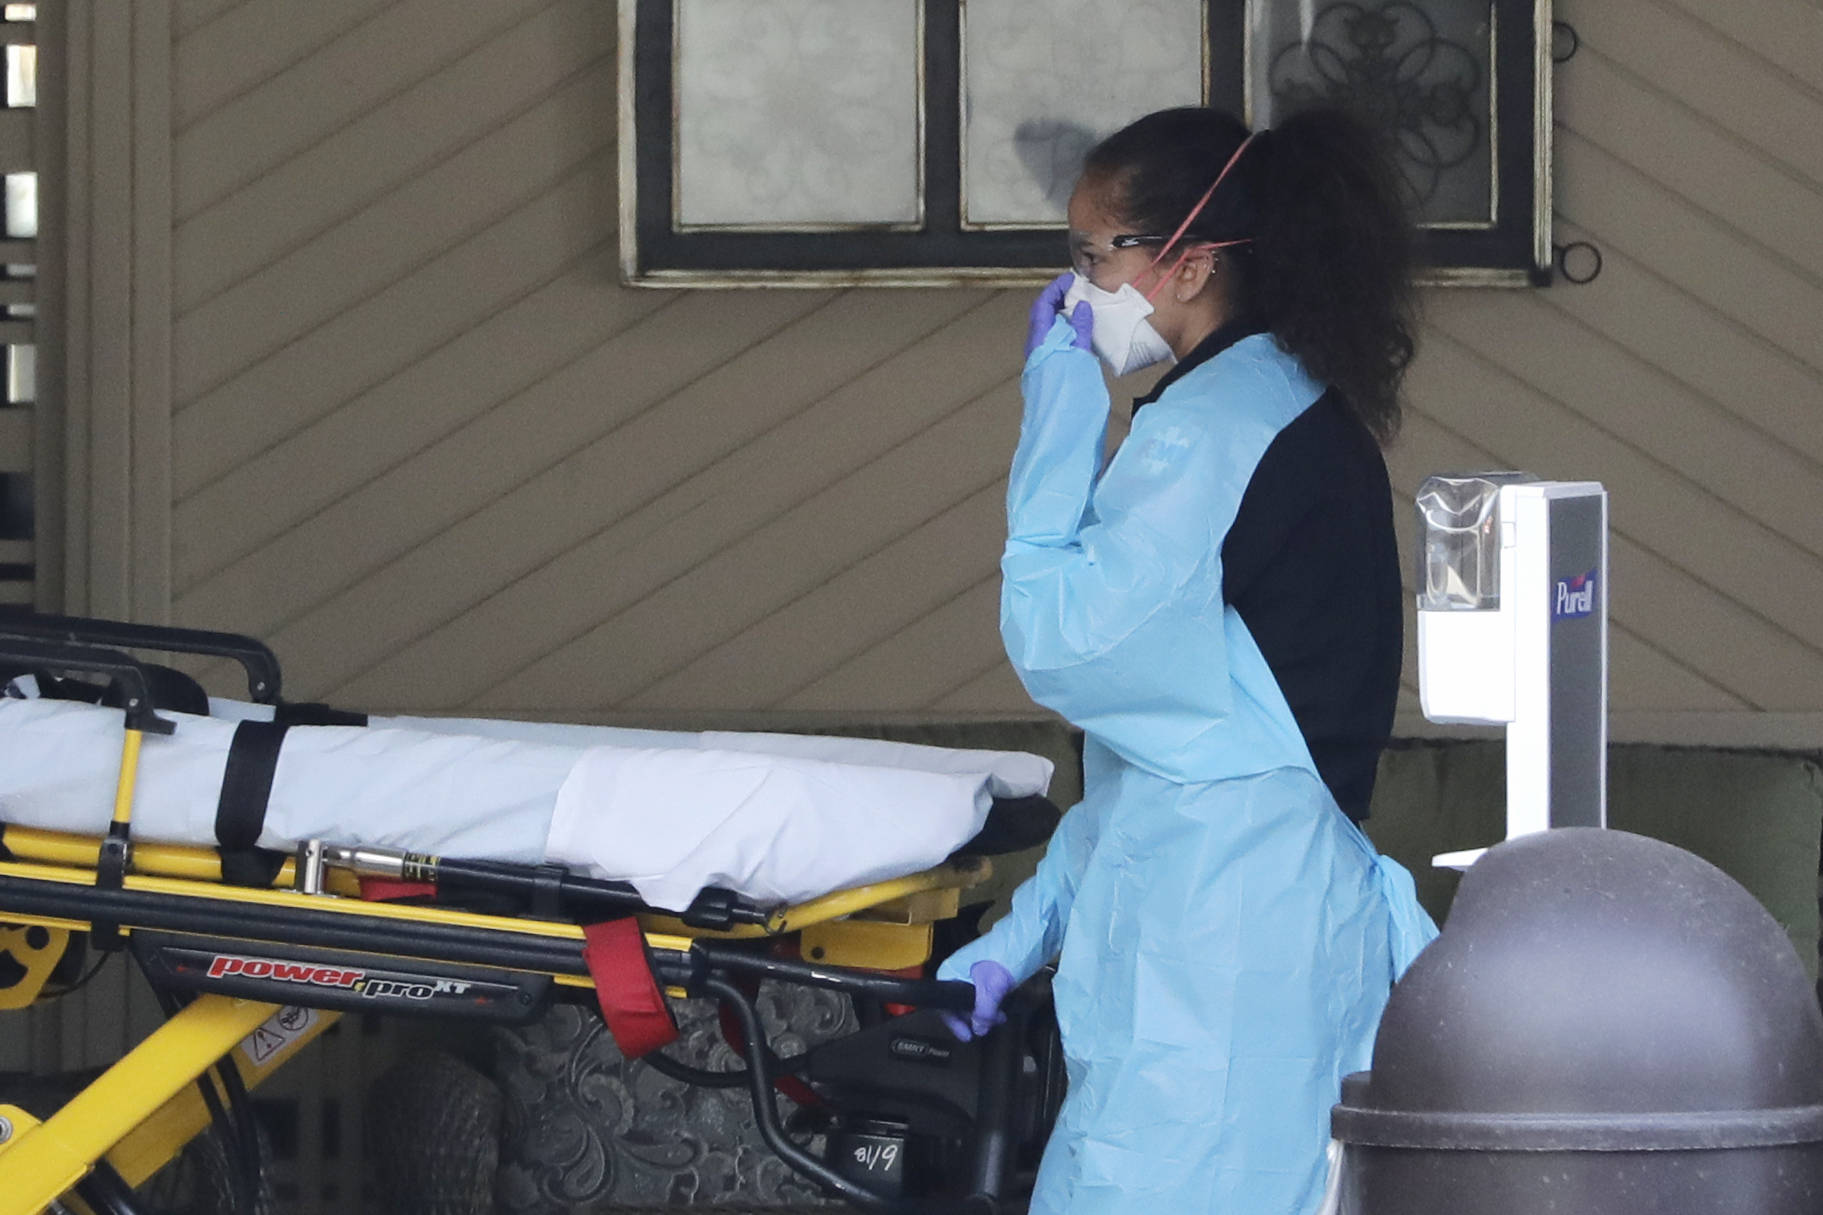 An ambulance worker adjusts her protective mask as she wheels a stretcher into a nursing facility where more than 50 people are sick and being tested for the COVID-19 virus, Saturday, Feb. 29, 2020, in Kirkland, Wash. (AP Photo/Elaine Thompson)